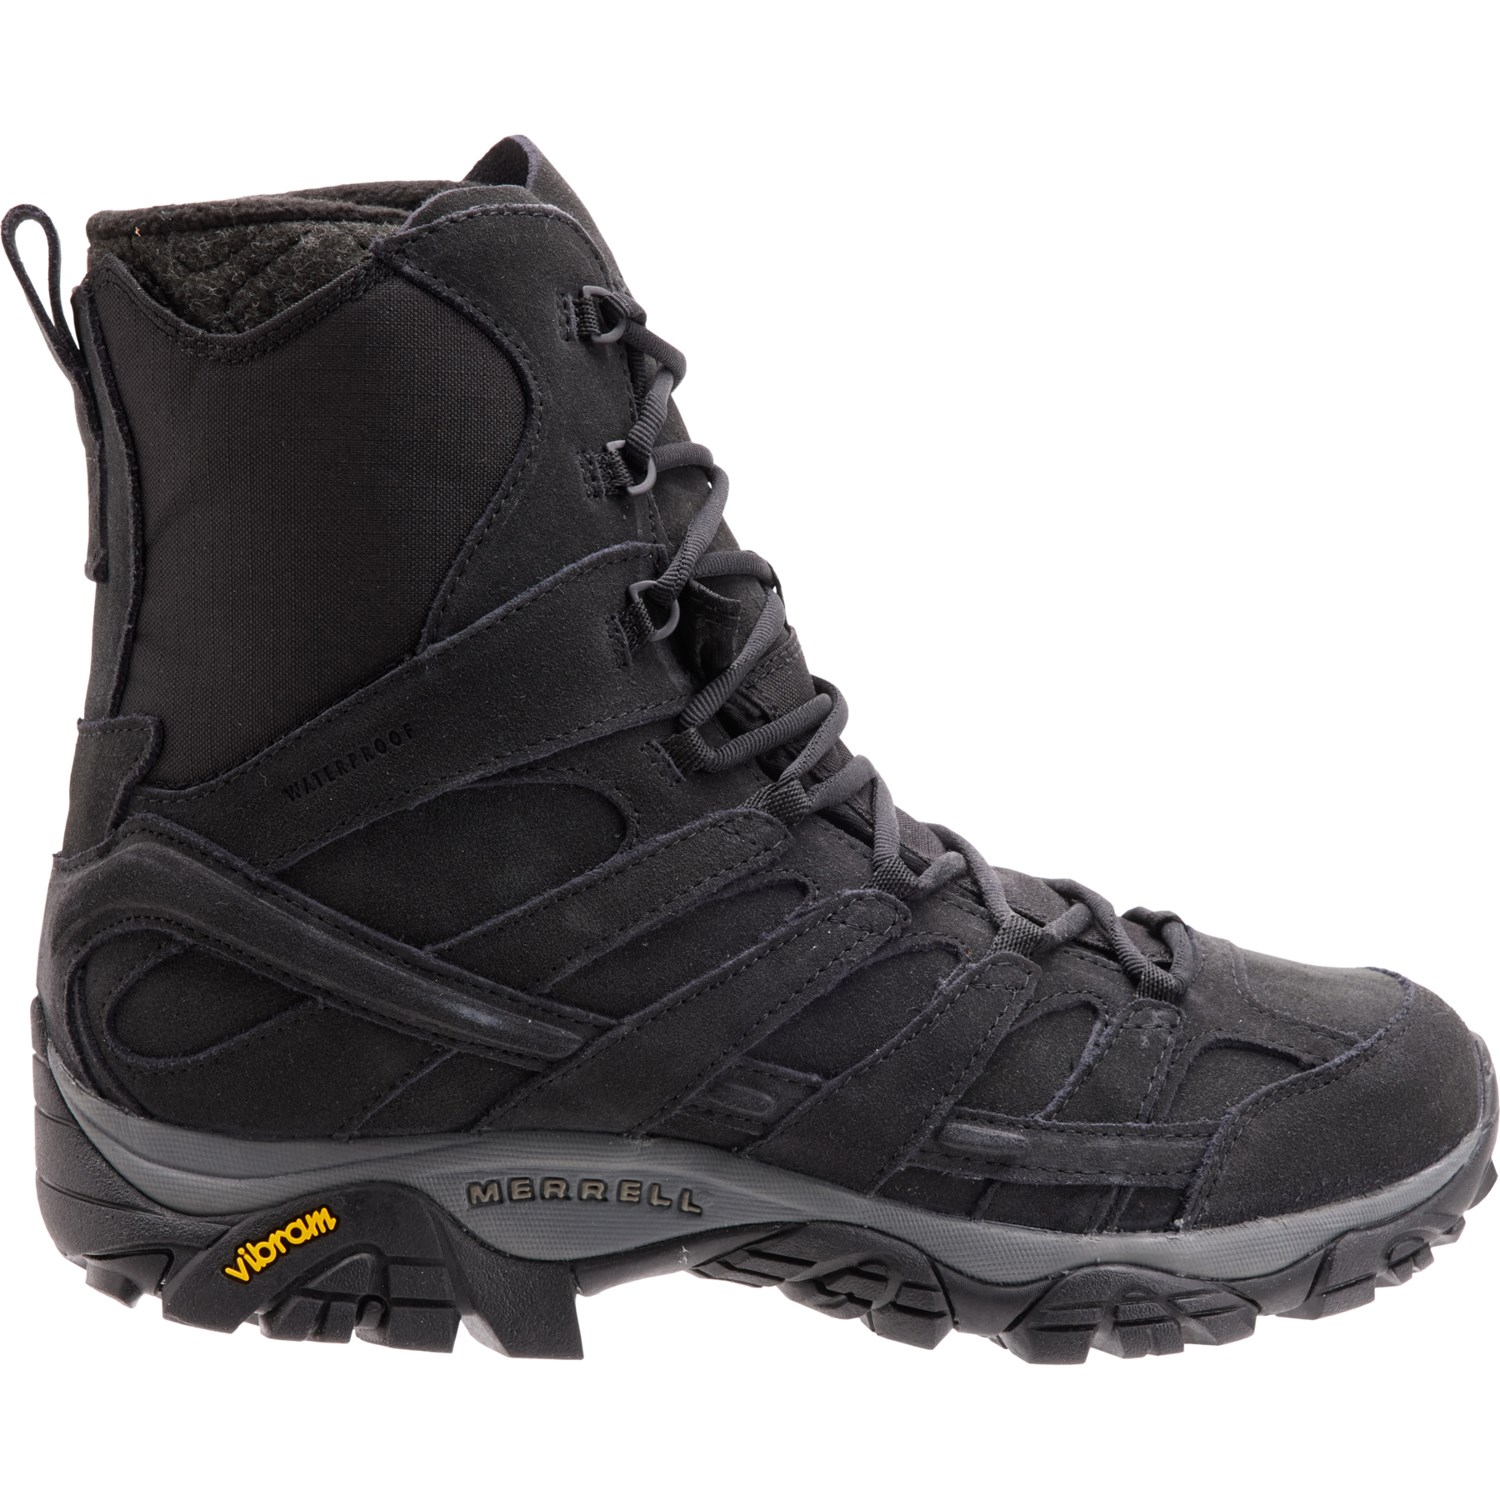 Merrell Moab 2 Decon Snow Boots (For Men) - Save 20%